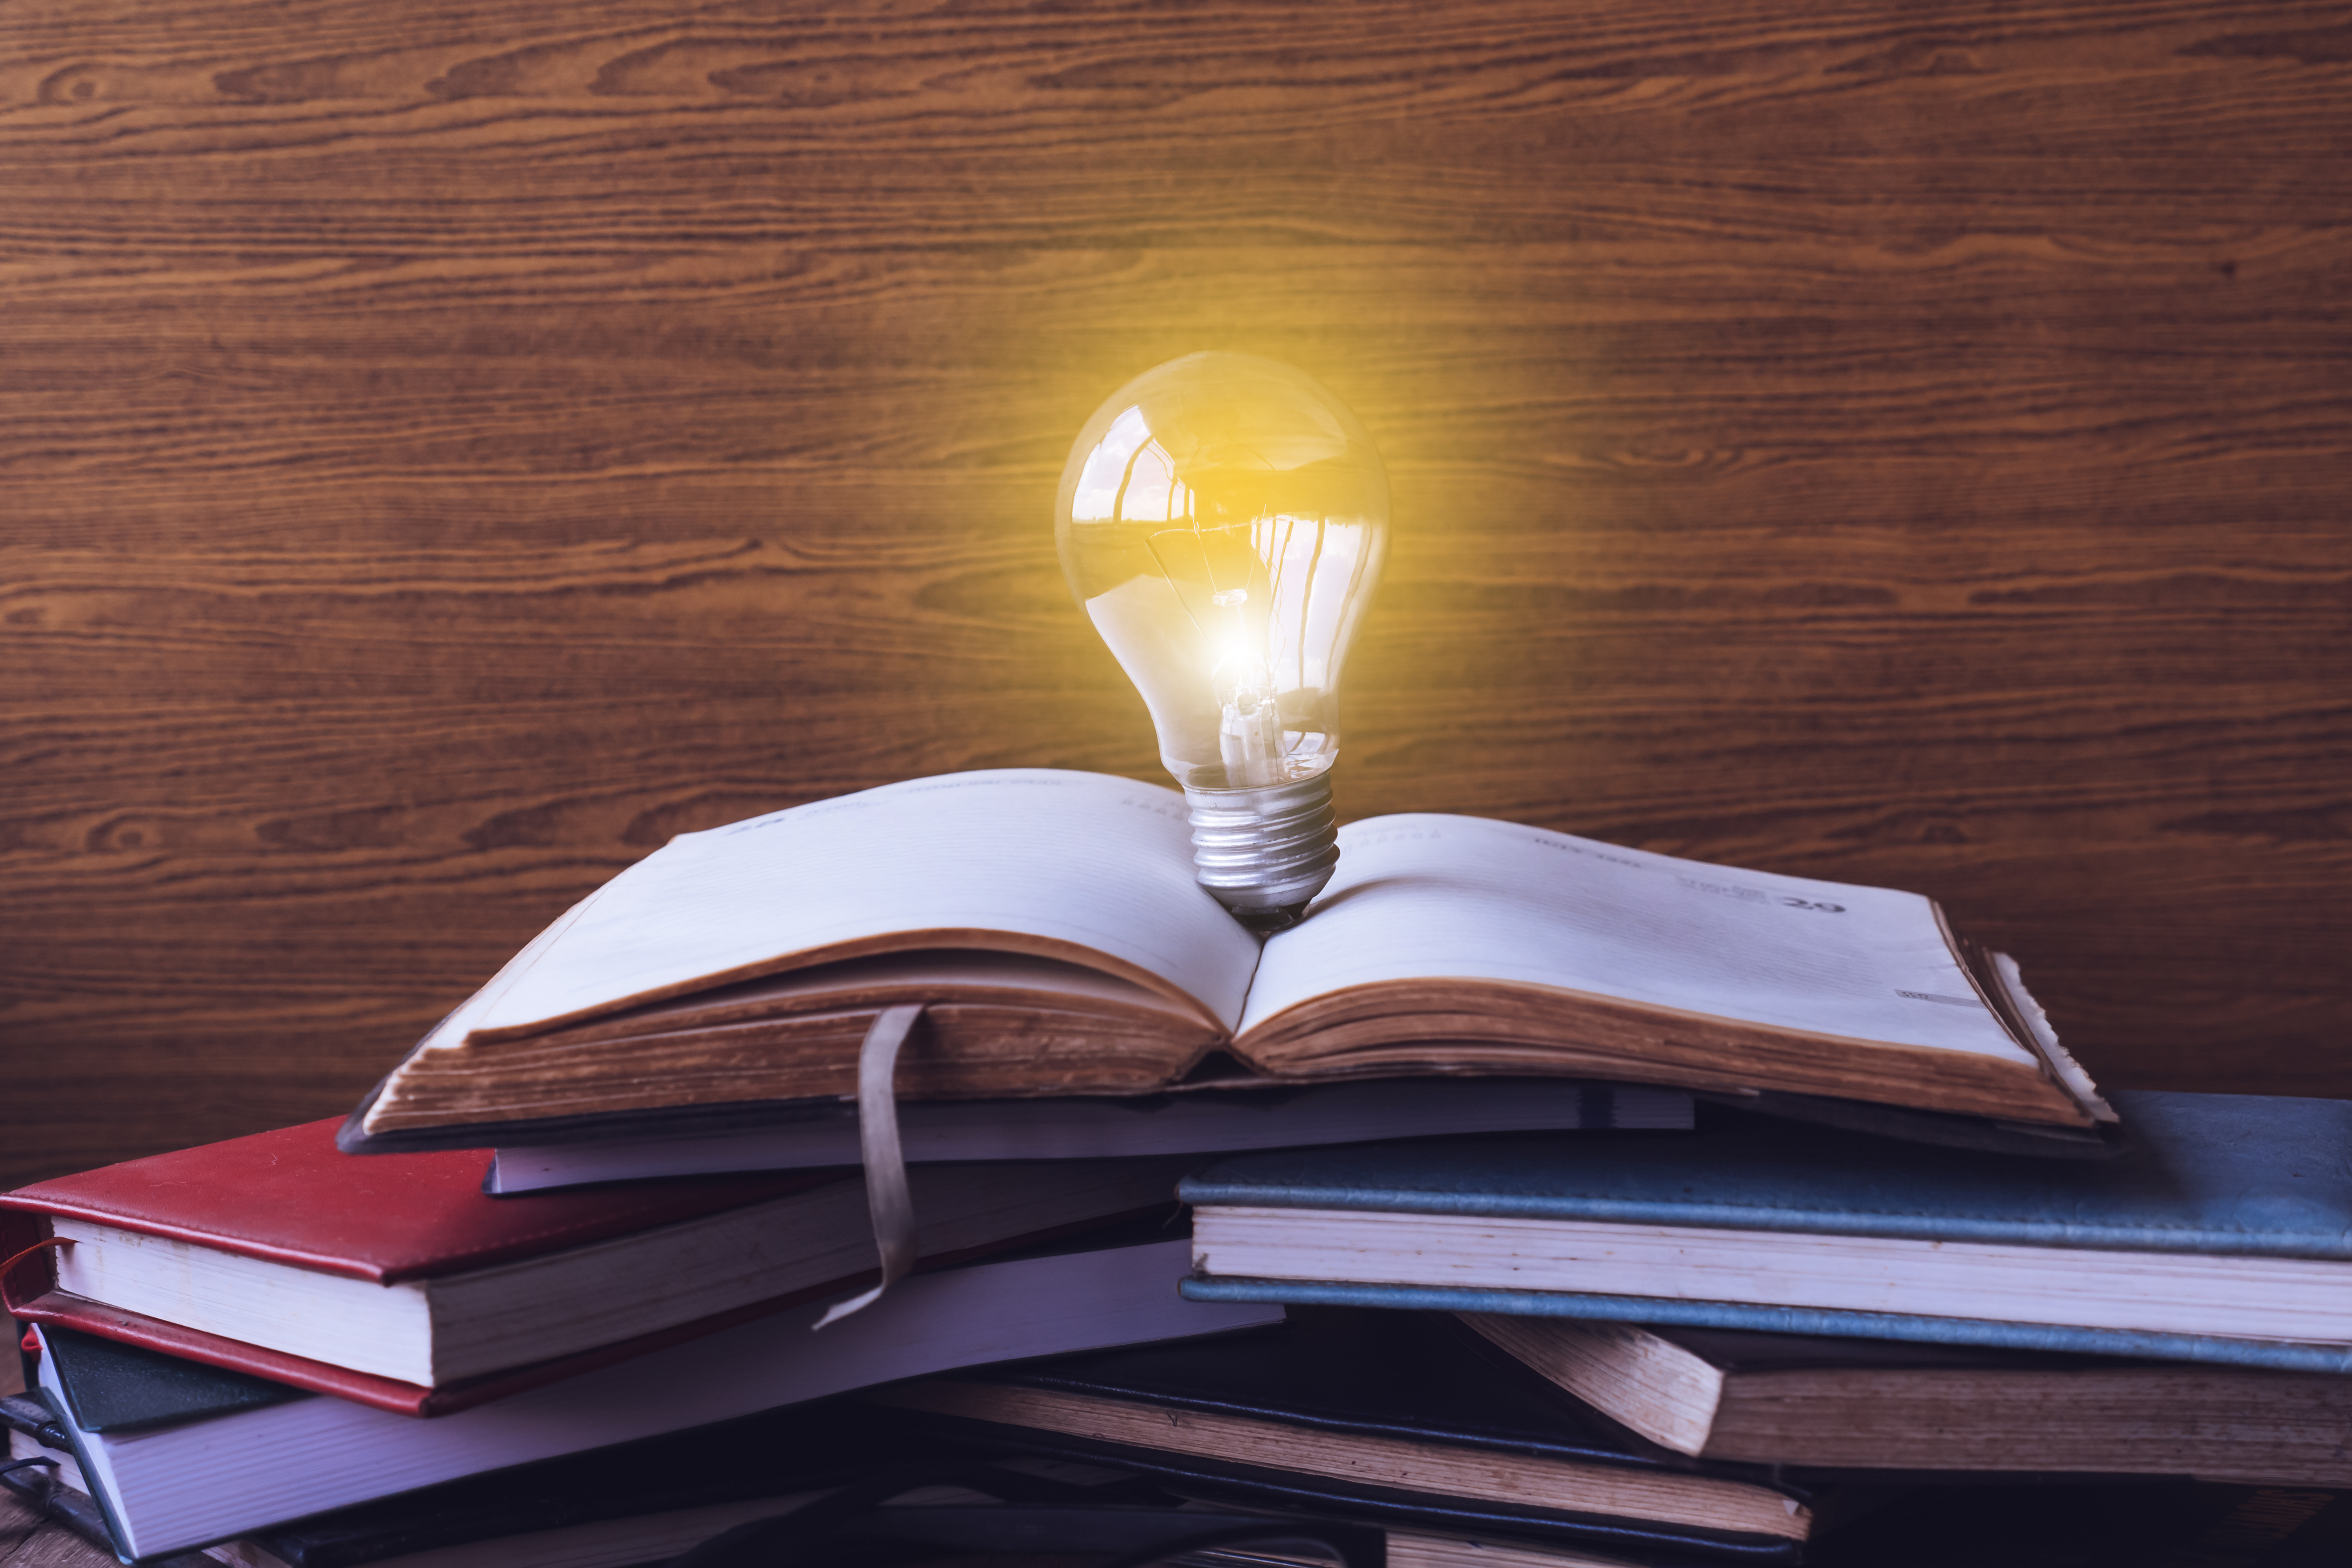 Open book with light bulb and hardback books on wood wall background.